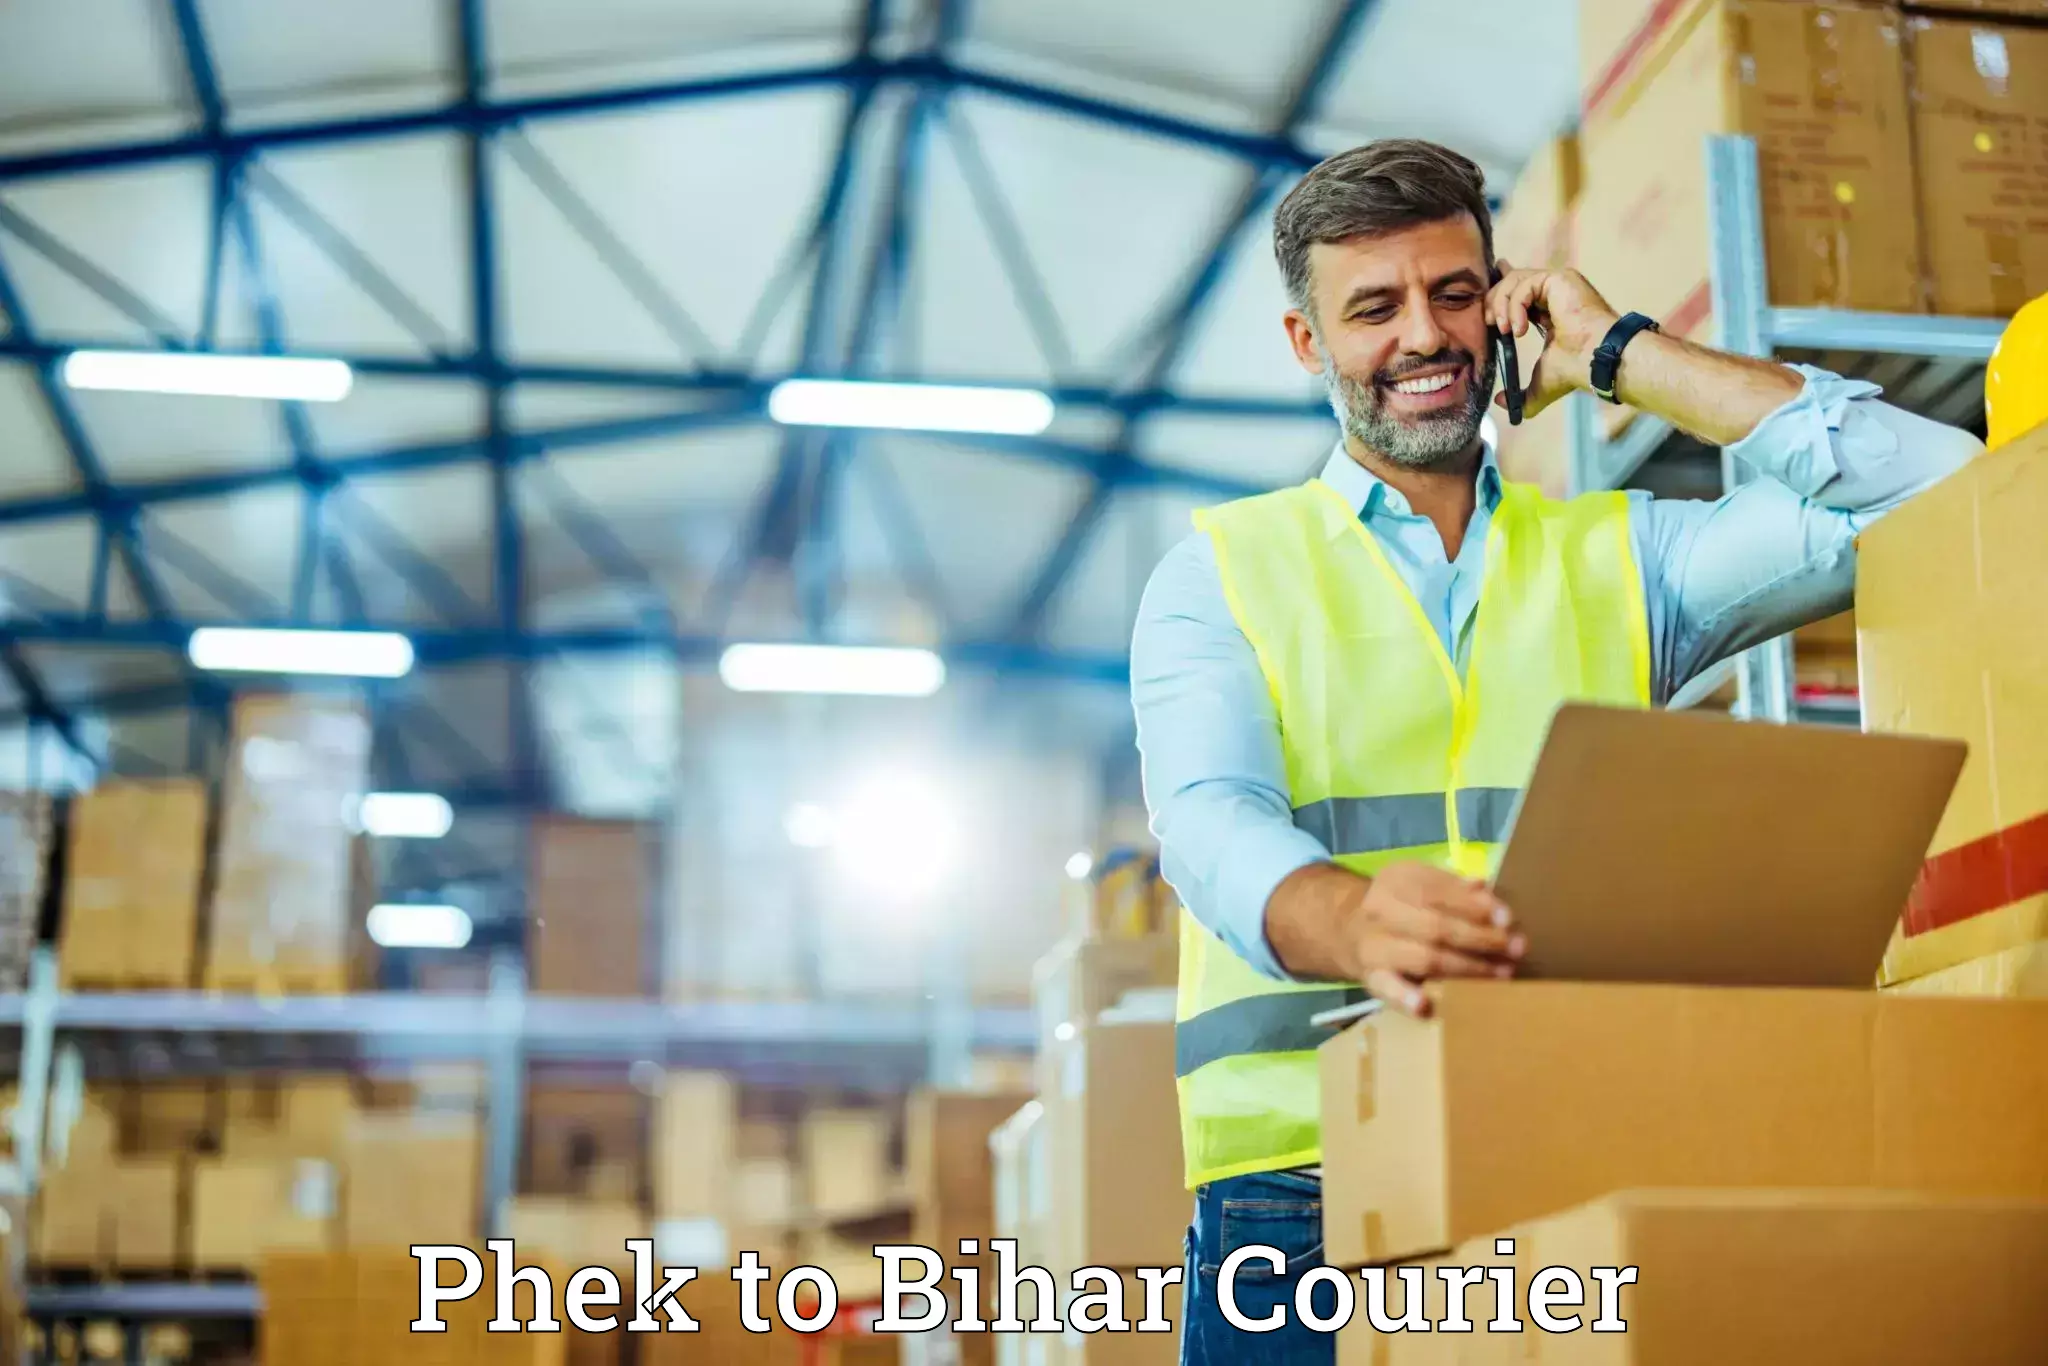 Furniture transport specialists Phek to Dhaka